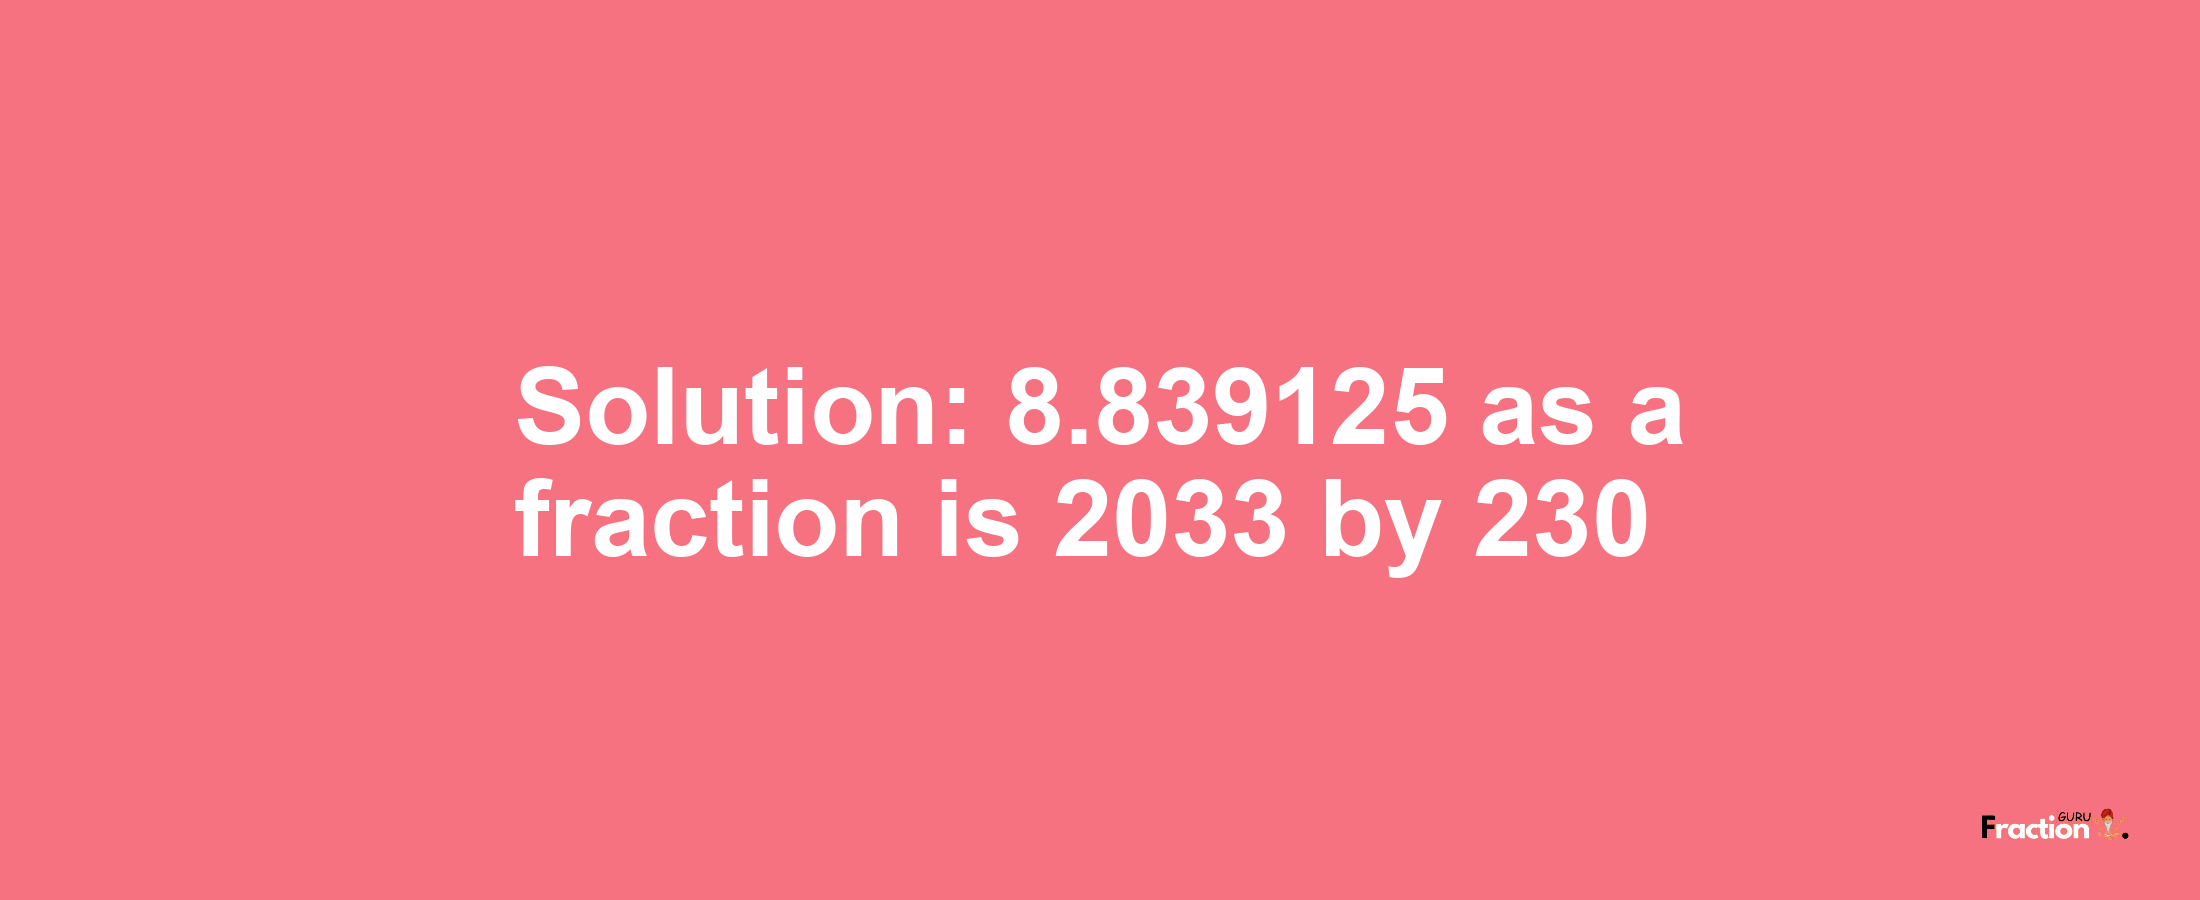 Solution:8.839125 as a fraction is 2033/230